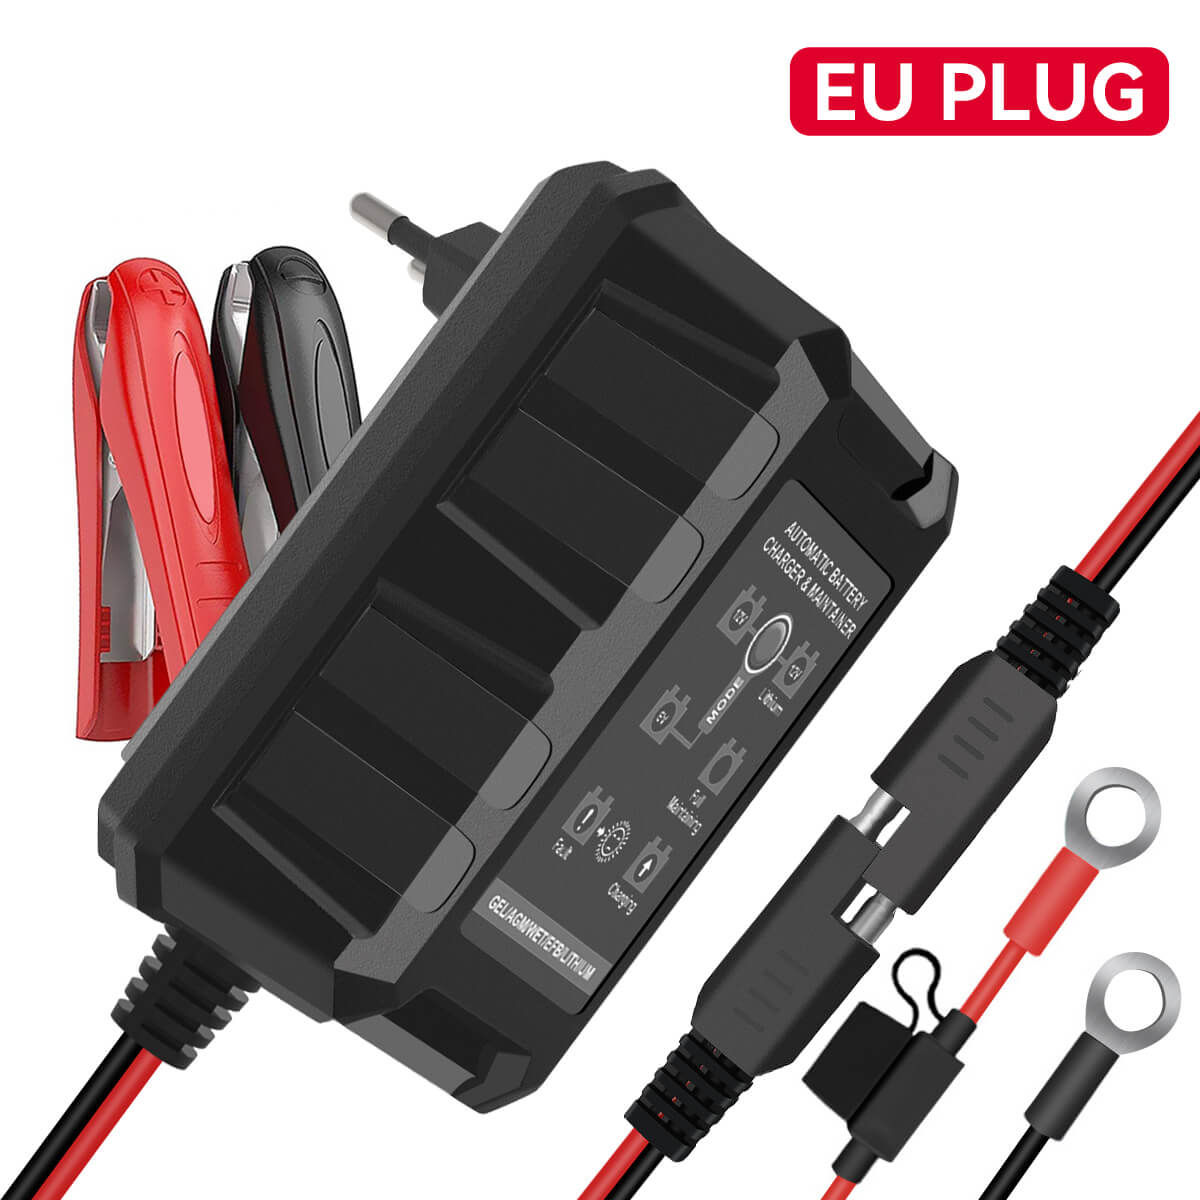 B98 Automatic Smart Charger, 1.5Amp Wall Mount